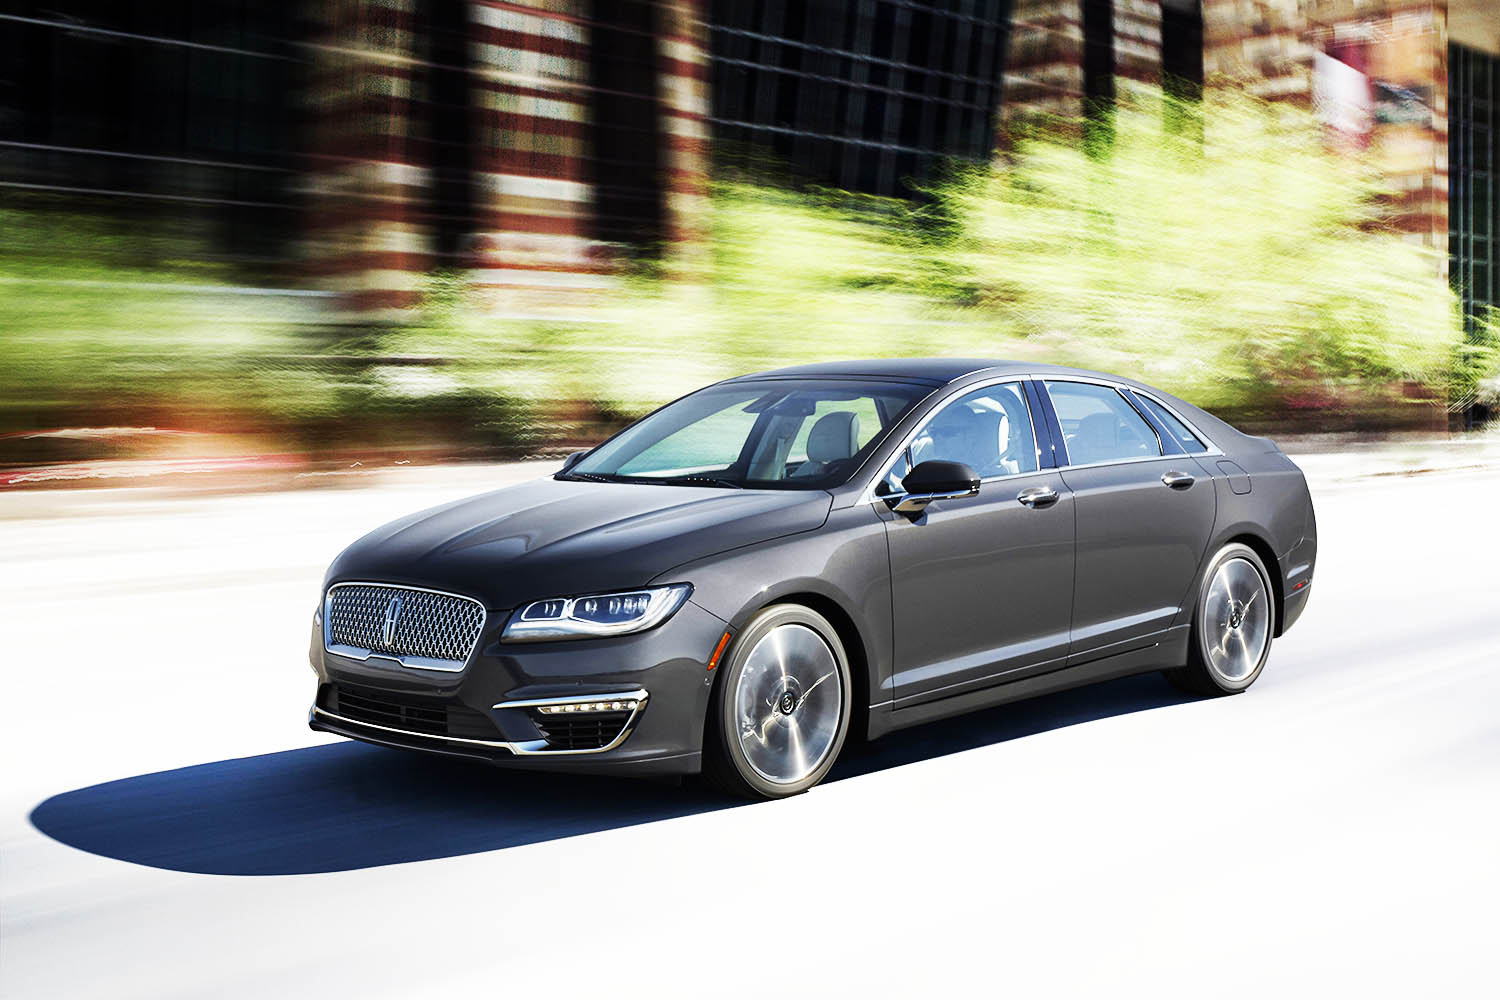 Lincoln-exclusive 3.0-liter GTDI V6 engine provides effortless performance on the new 2017 Lincoln MKZ.